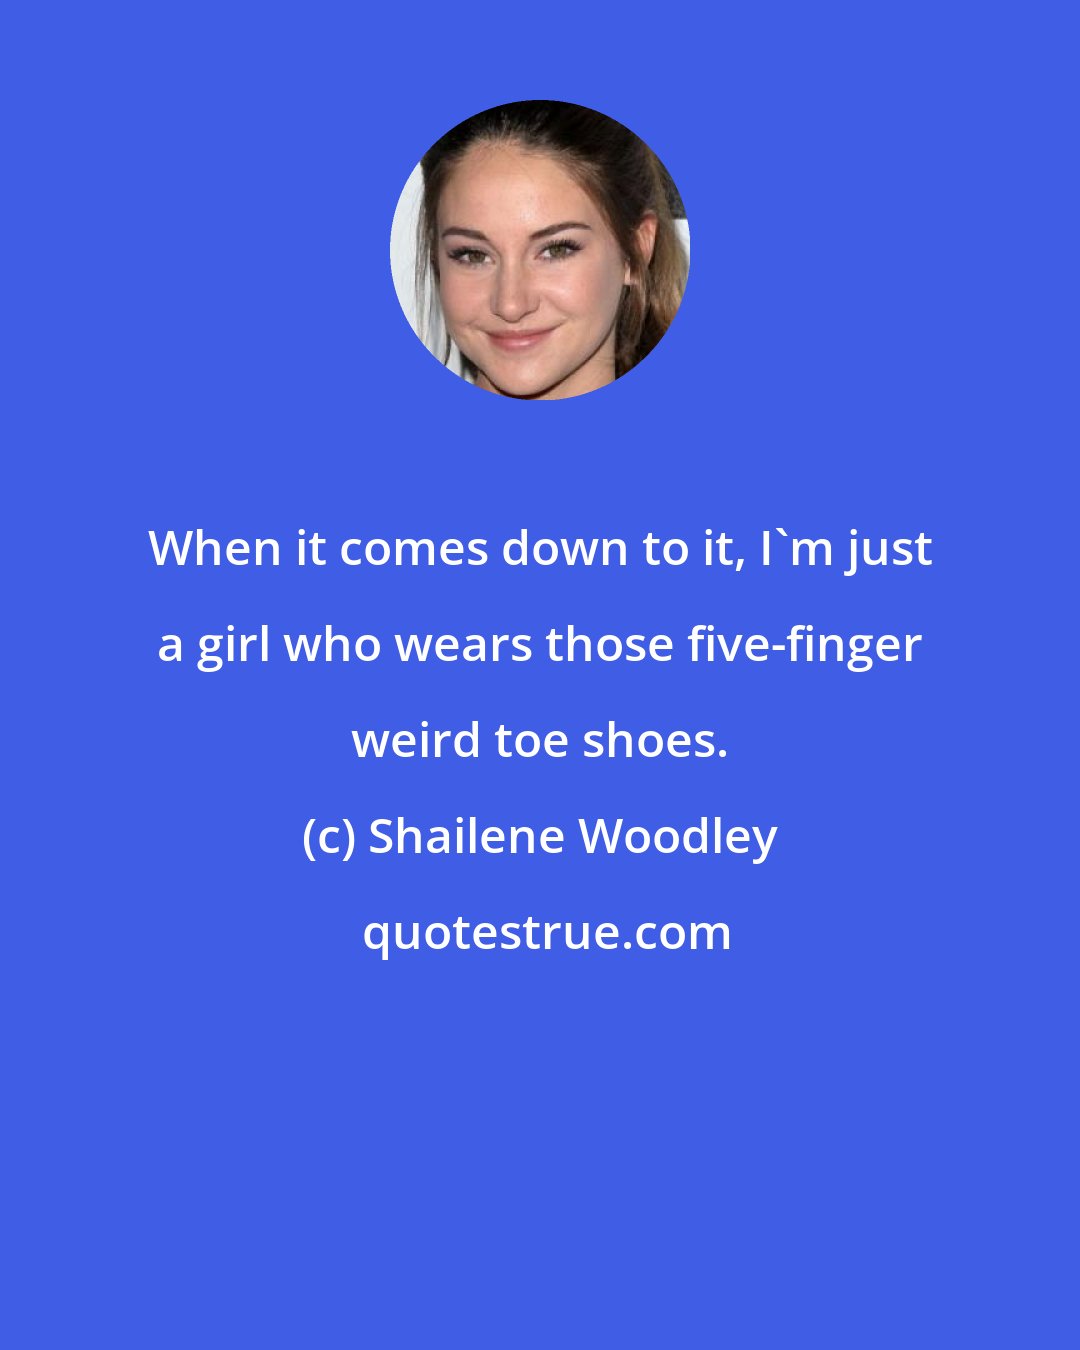 Shailene Woodley: When it comes down to it, I'm just a girl who wears those five-finger weird toe shoes.